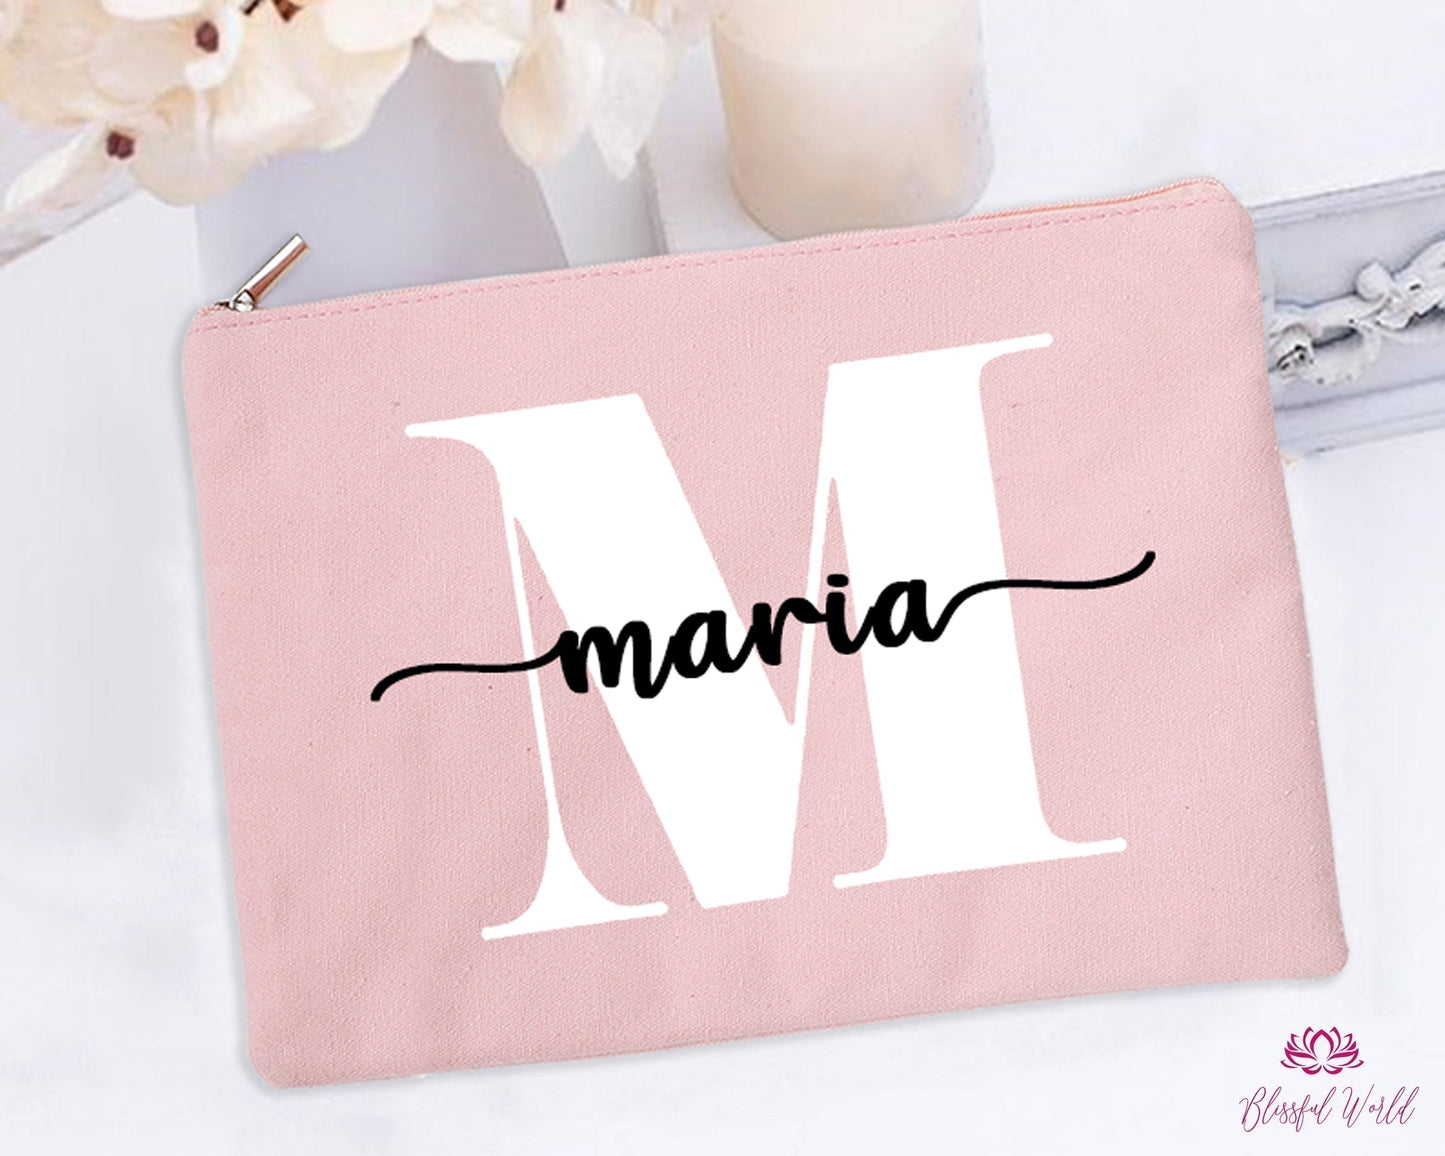 Cosmetic Bags - Custom Bridesmaid Gift for Her, Personalized GIft Bag for Mom, Teacher, Friend Birthday Monogram Cosmetic Bag